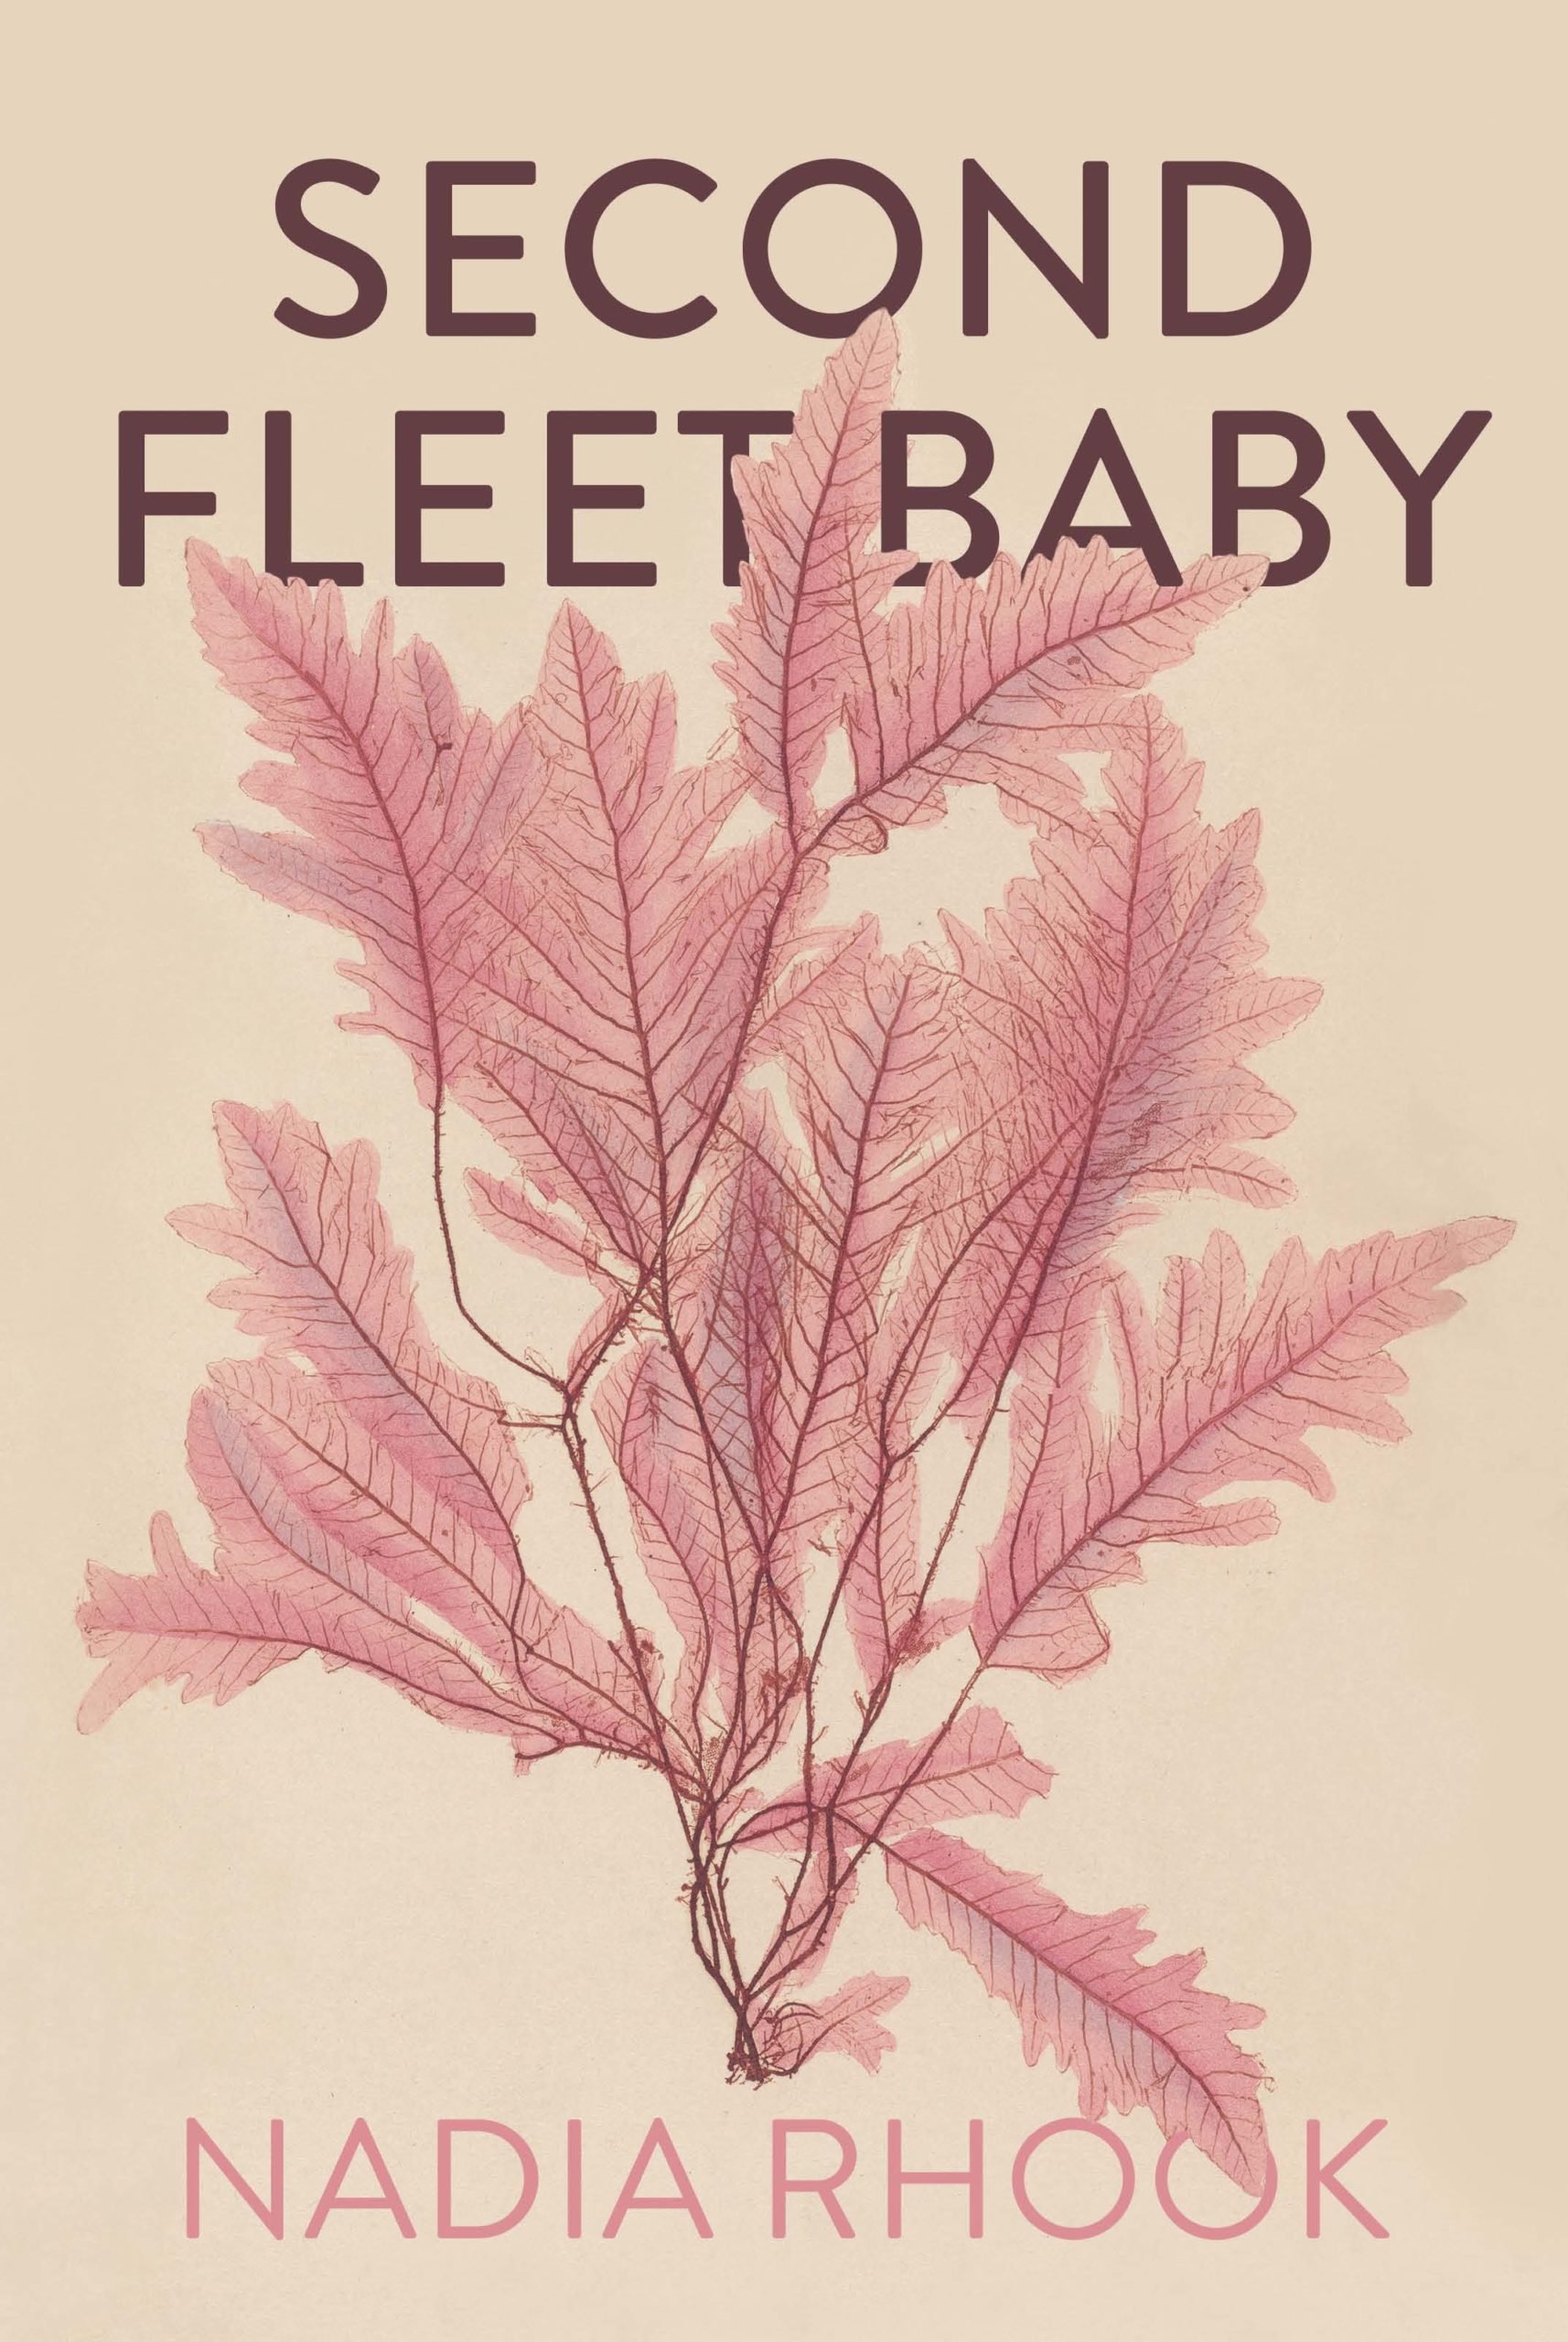 Second-Fleet-Baby-cover-scaled.jpg